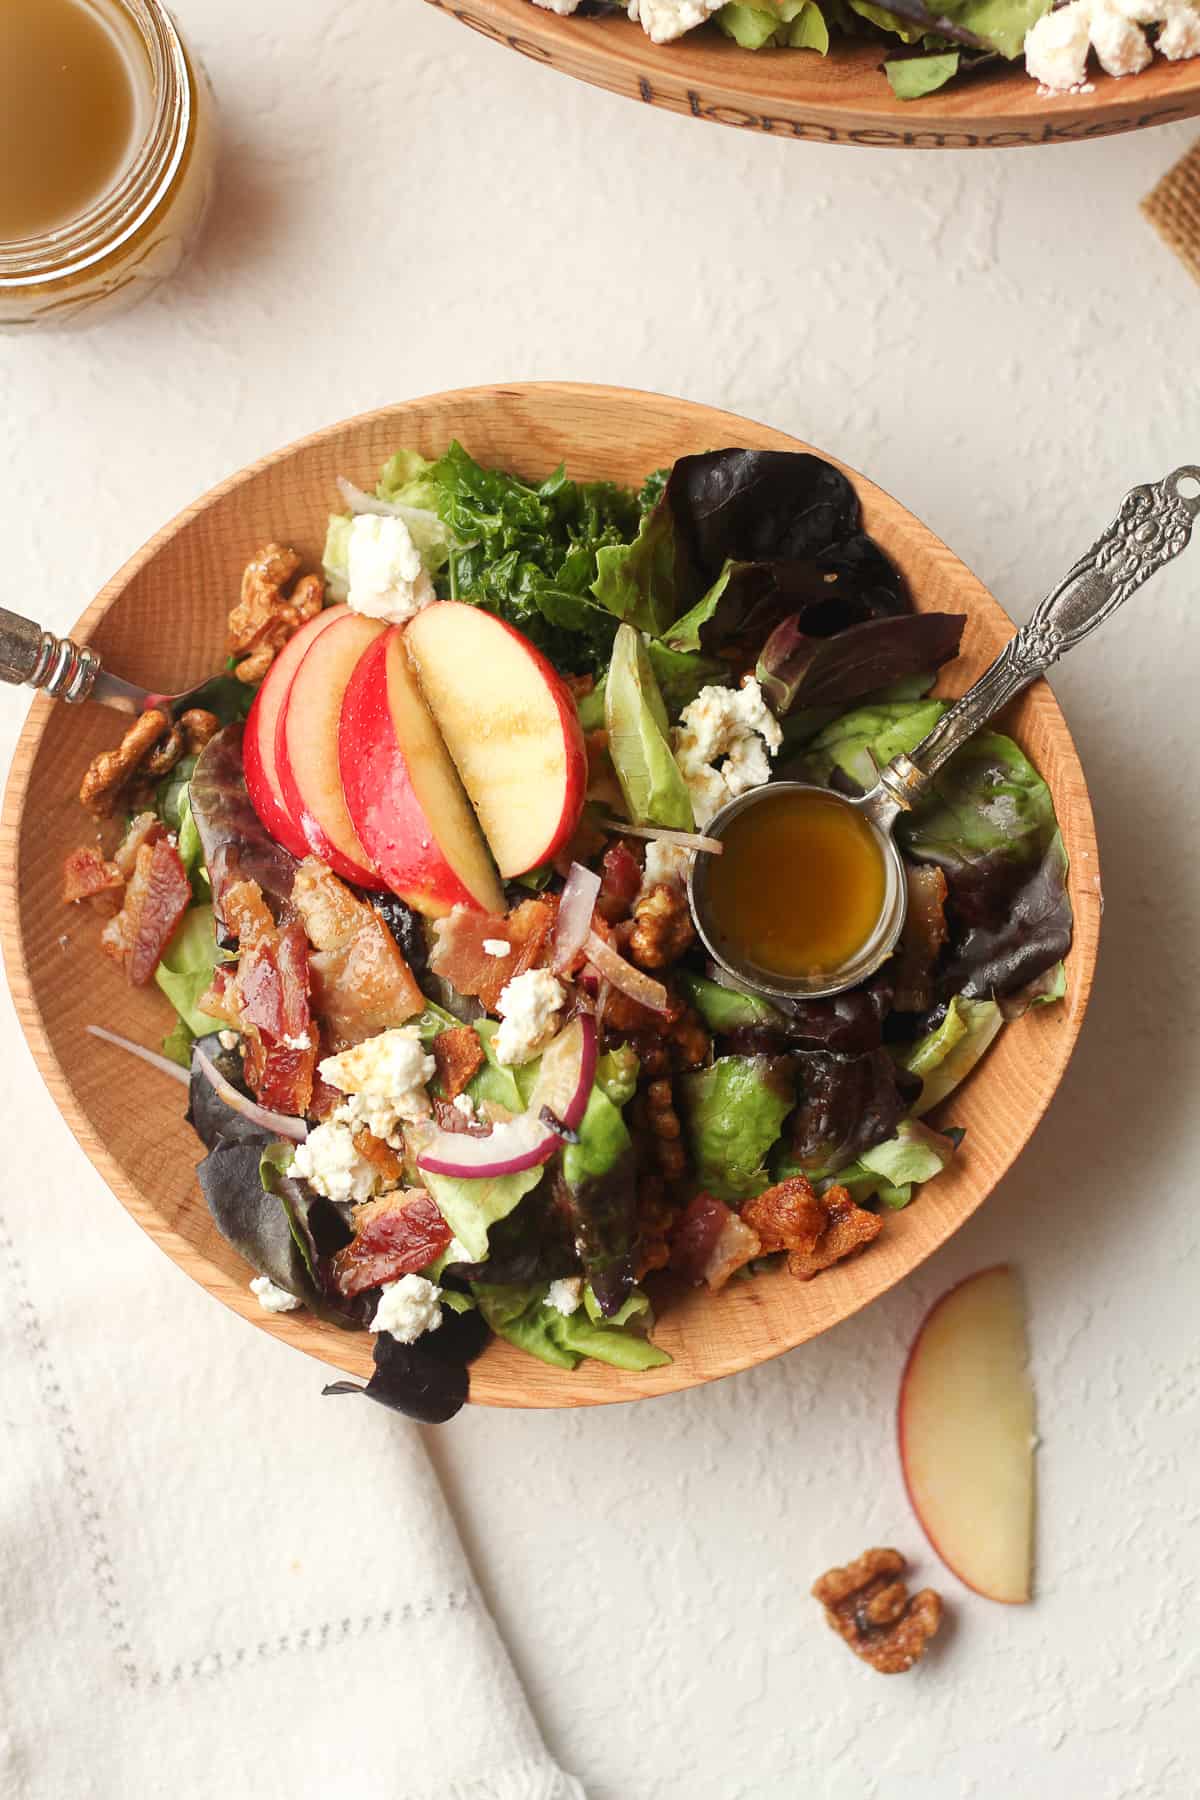 A wooden serving bowl of the Fall harvest salad with the dressing over top.